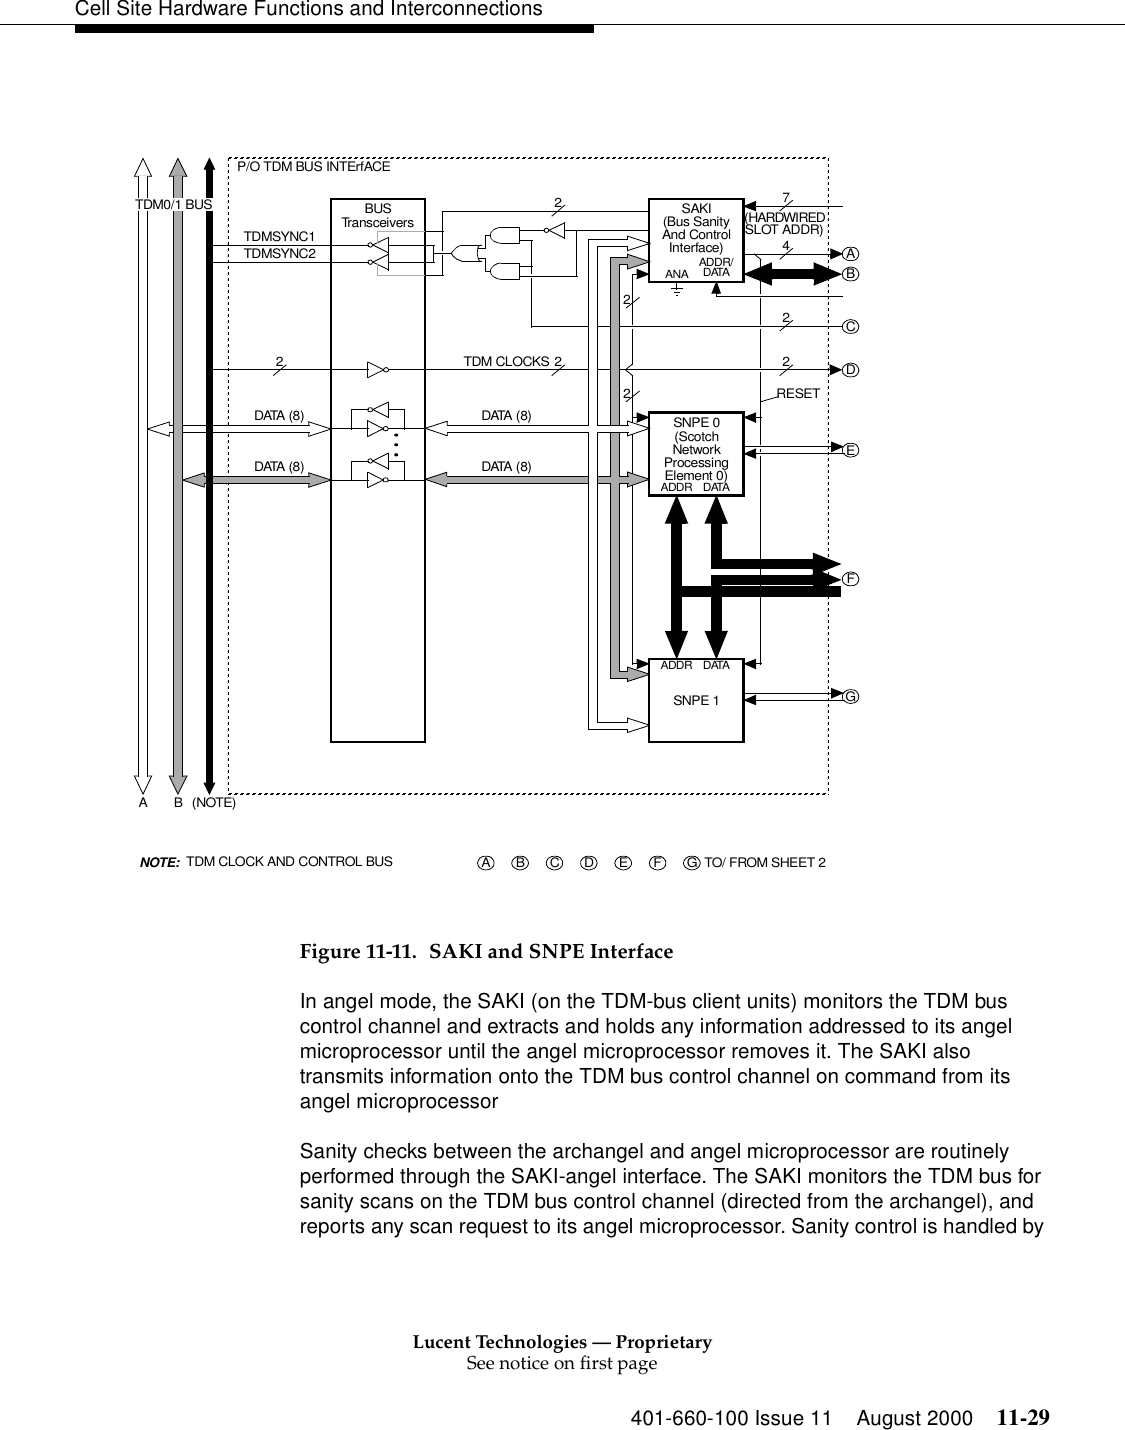 Lucent Technologies — ProprietarySee notice on first page401-660-100 Issue 11 August 2000 11-29Cell Site Hardware Functions and Interconnections Figure 11-11. SAKI and SNPE InterfaceIn angel mode, the SAKI (on the TDM-bus client units) monitors the TDM bus control channel and extracts and holds any information addressed to its angel microprocessor until the angel microprocessor removes it. The SAKI also transmits information onto the TDM bus control channel on command from its angel microprocessorSanity checks between the archangel and angel microprocessor are routinely performed through the SAKI-angel interface. The SAKI monitors the TDM bus for sanity scans on the TDM bus control channel (directed from the archangel), and reports any scan request to its angel microprocessor. Sanity control is handled by C2(NOTE)BABUSTr a ns c ei v er sADDR DATASNPE 0(ScotchNetworkProcessingElement 0)SAKI(Bus SanityAnd ControlInterface)ANA ADDR/DATATDM CLOCKS 2DFBRESET22EGTDM CLOCK AND CONTROL BUSNOTE:D E F G TO/ FROM SHEET 2A B C22P/O TDM BUS INTErfACETDM0/1 BUSDATA (8)DATA (8)TDMSYNC2TDMSYNC12DATA (8)DATA (8)ADDR DATASNPE 1A4(HARDWIREDSLOT ADDR)7